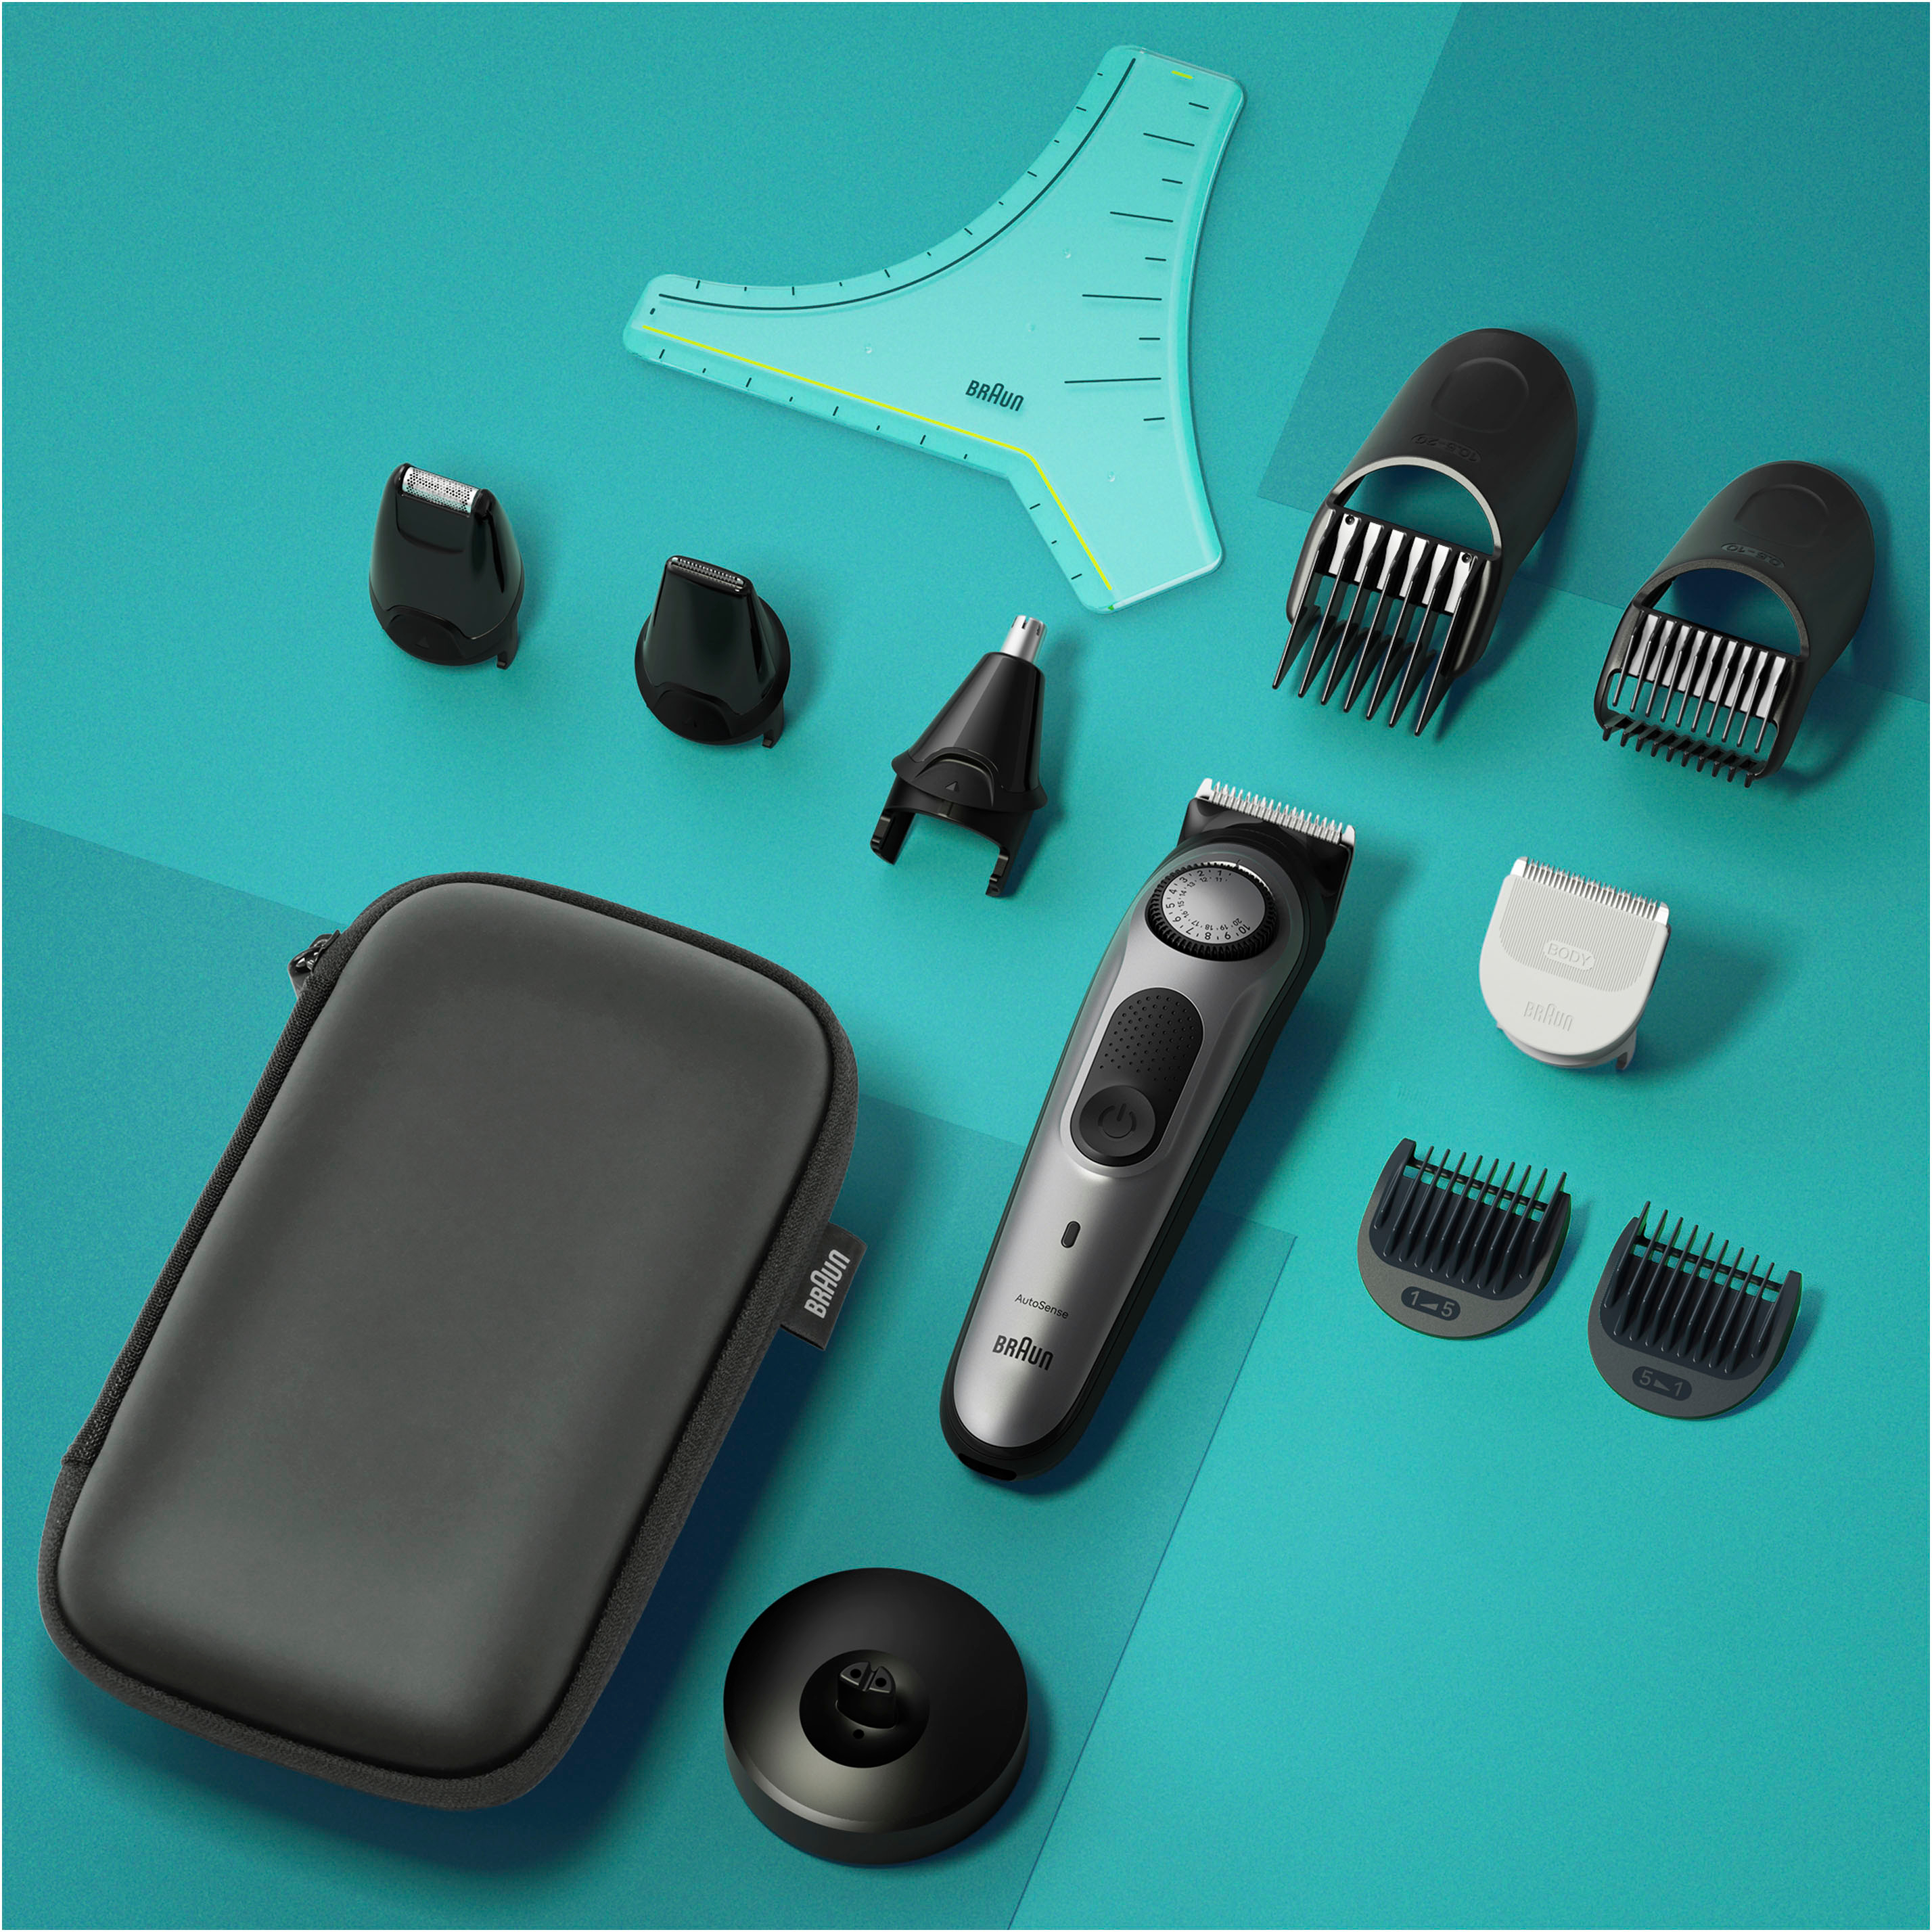 7 Buy - & 7420 Series AiO7420 Best Grooming Style Silver All-In-One Kit Braun Trimmer Kit, with Beard More 11-in-1